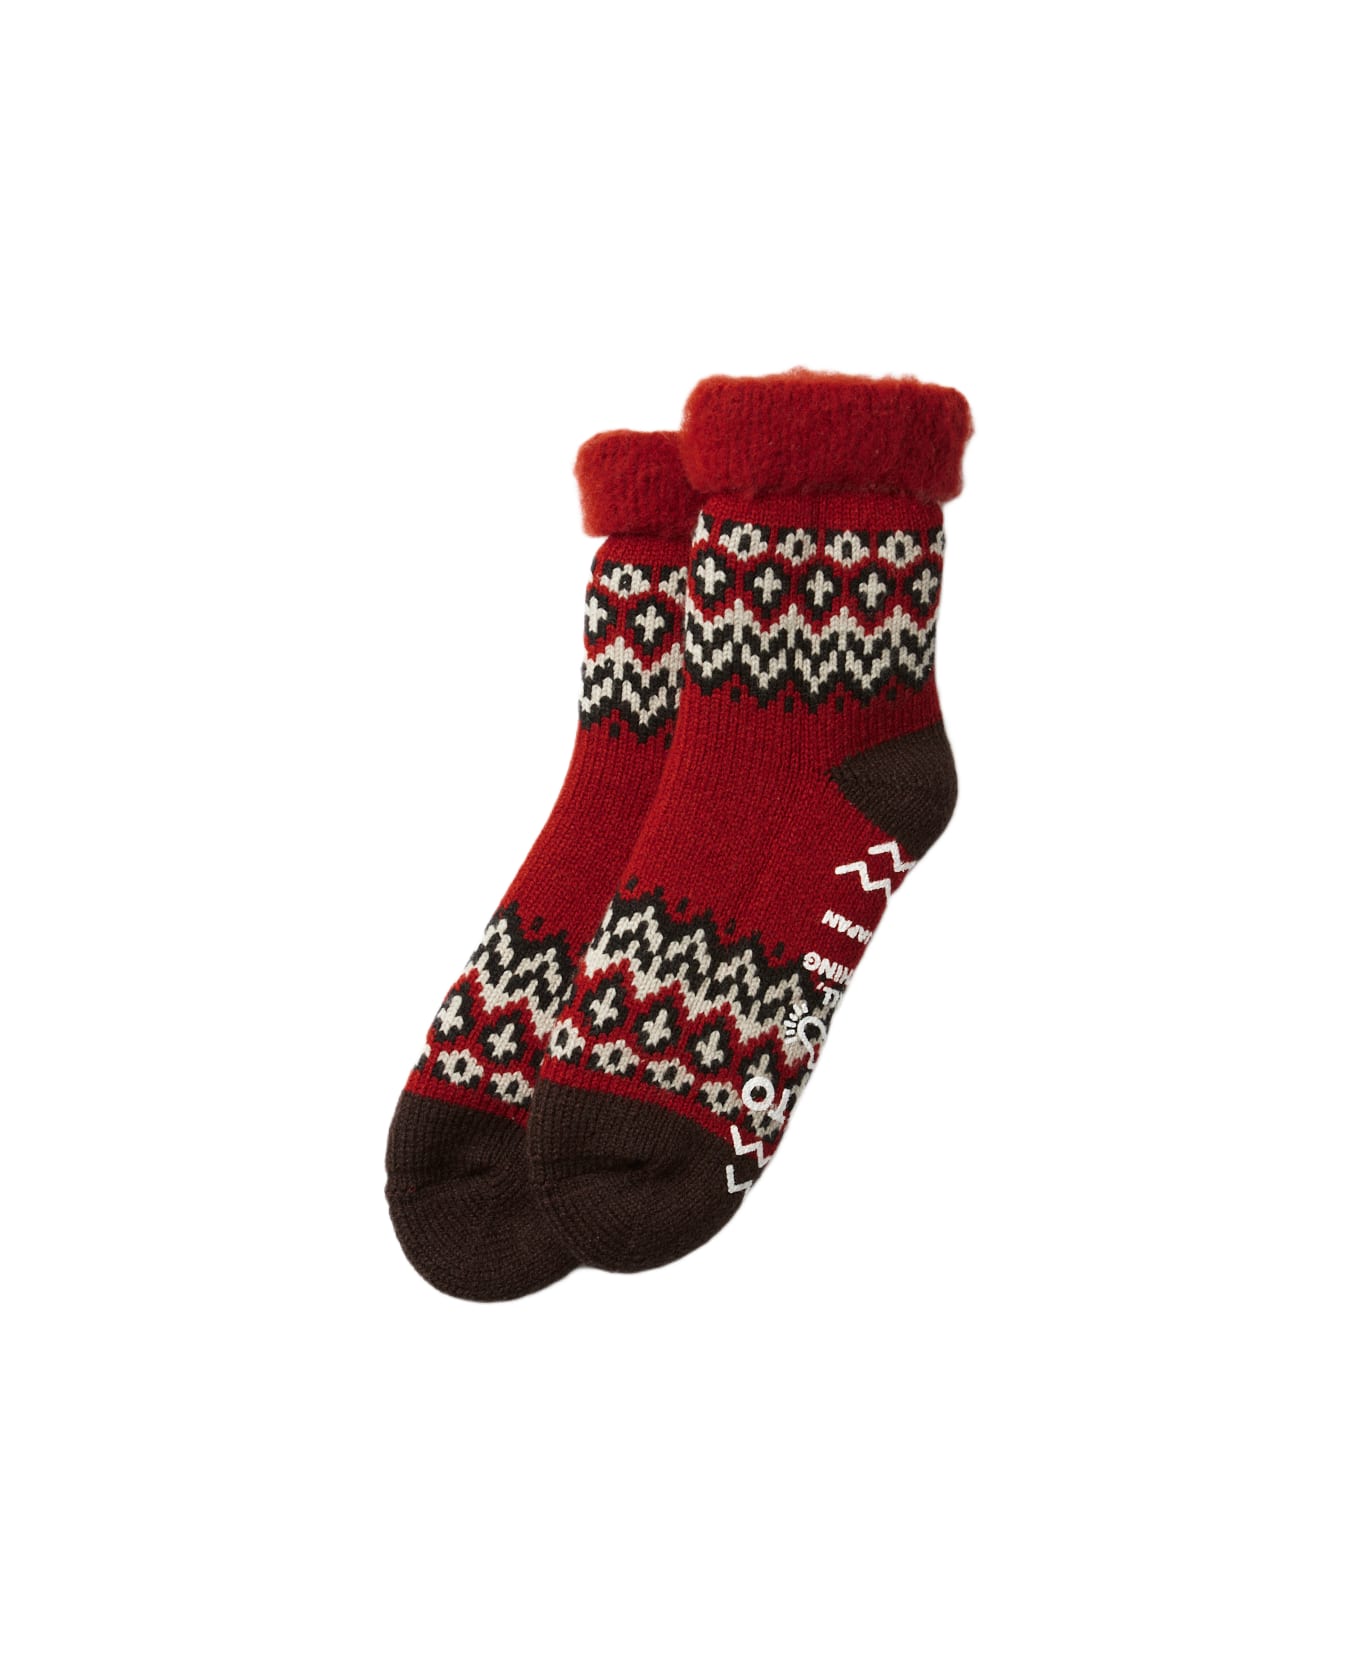 Rototo Comfy Room Socks Nordic - Red 靴下